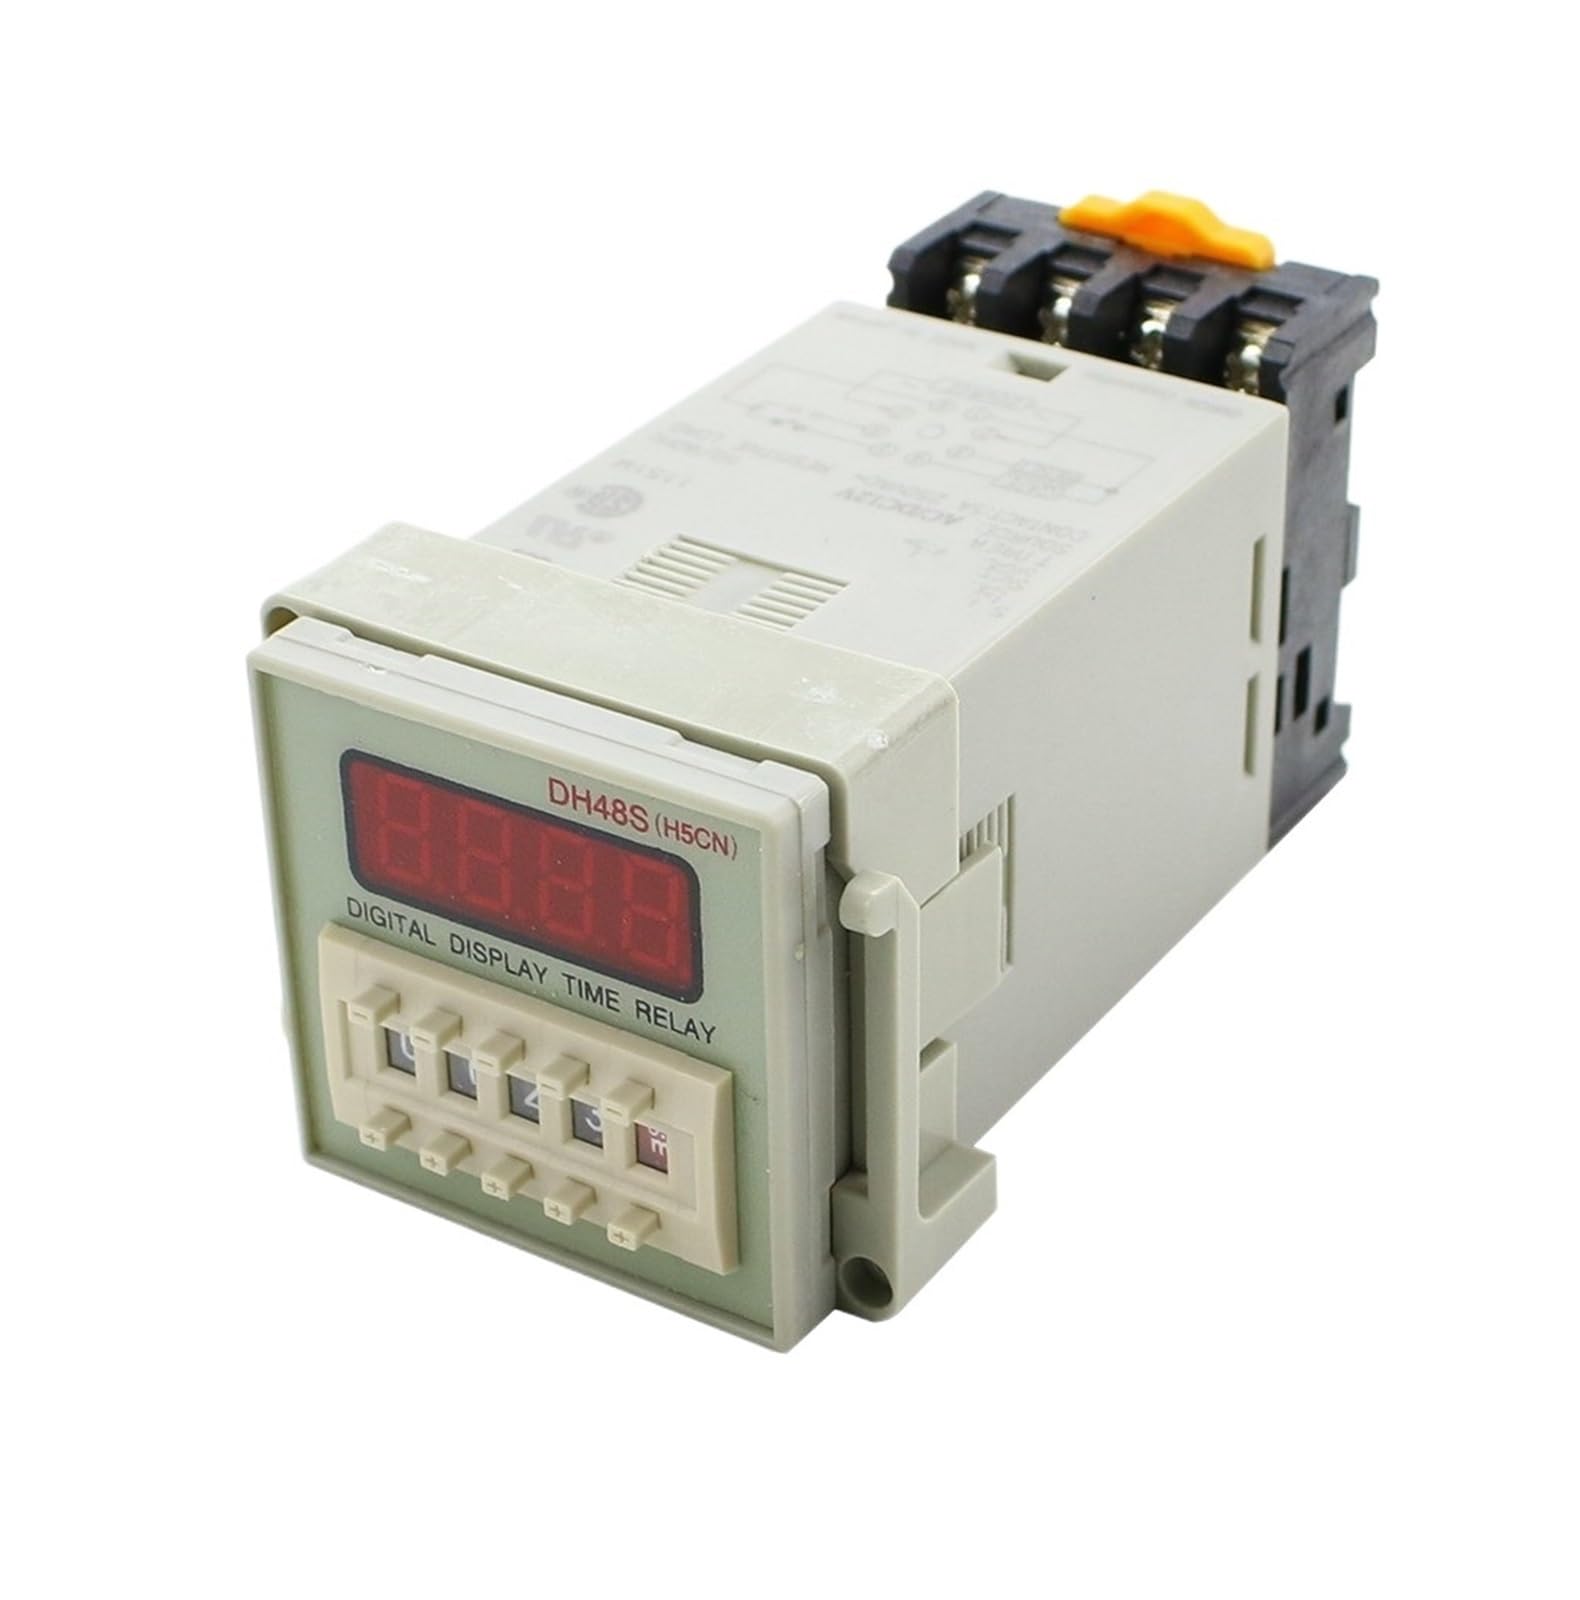 DH48S-2Z Timer Digital Time Relay 0.01s-9999H Hours Time Delay Relay with Socket Base Included NWPNLXEA(DC 12V) von NWPNLXEA